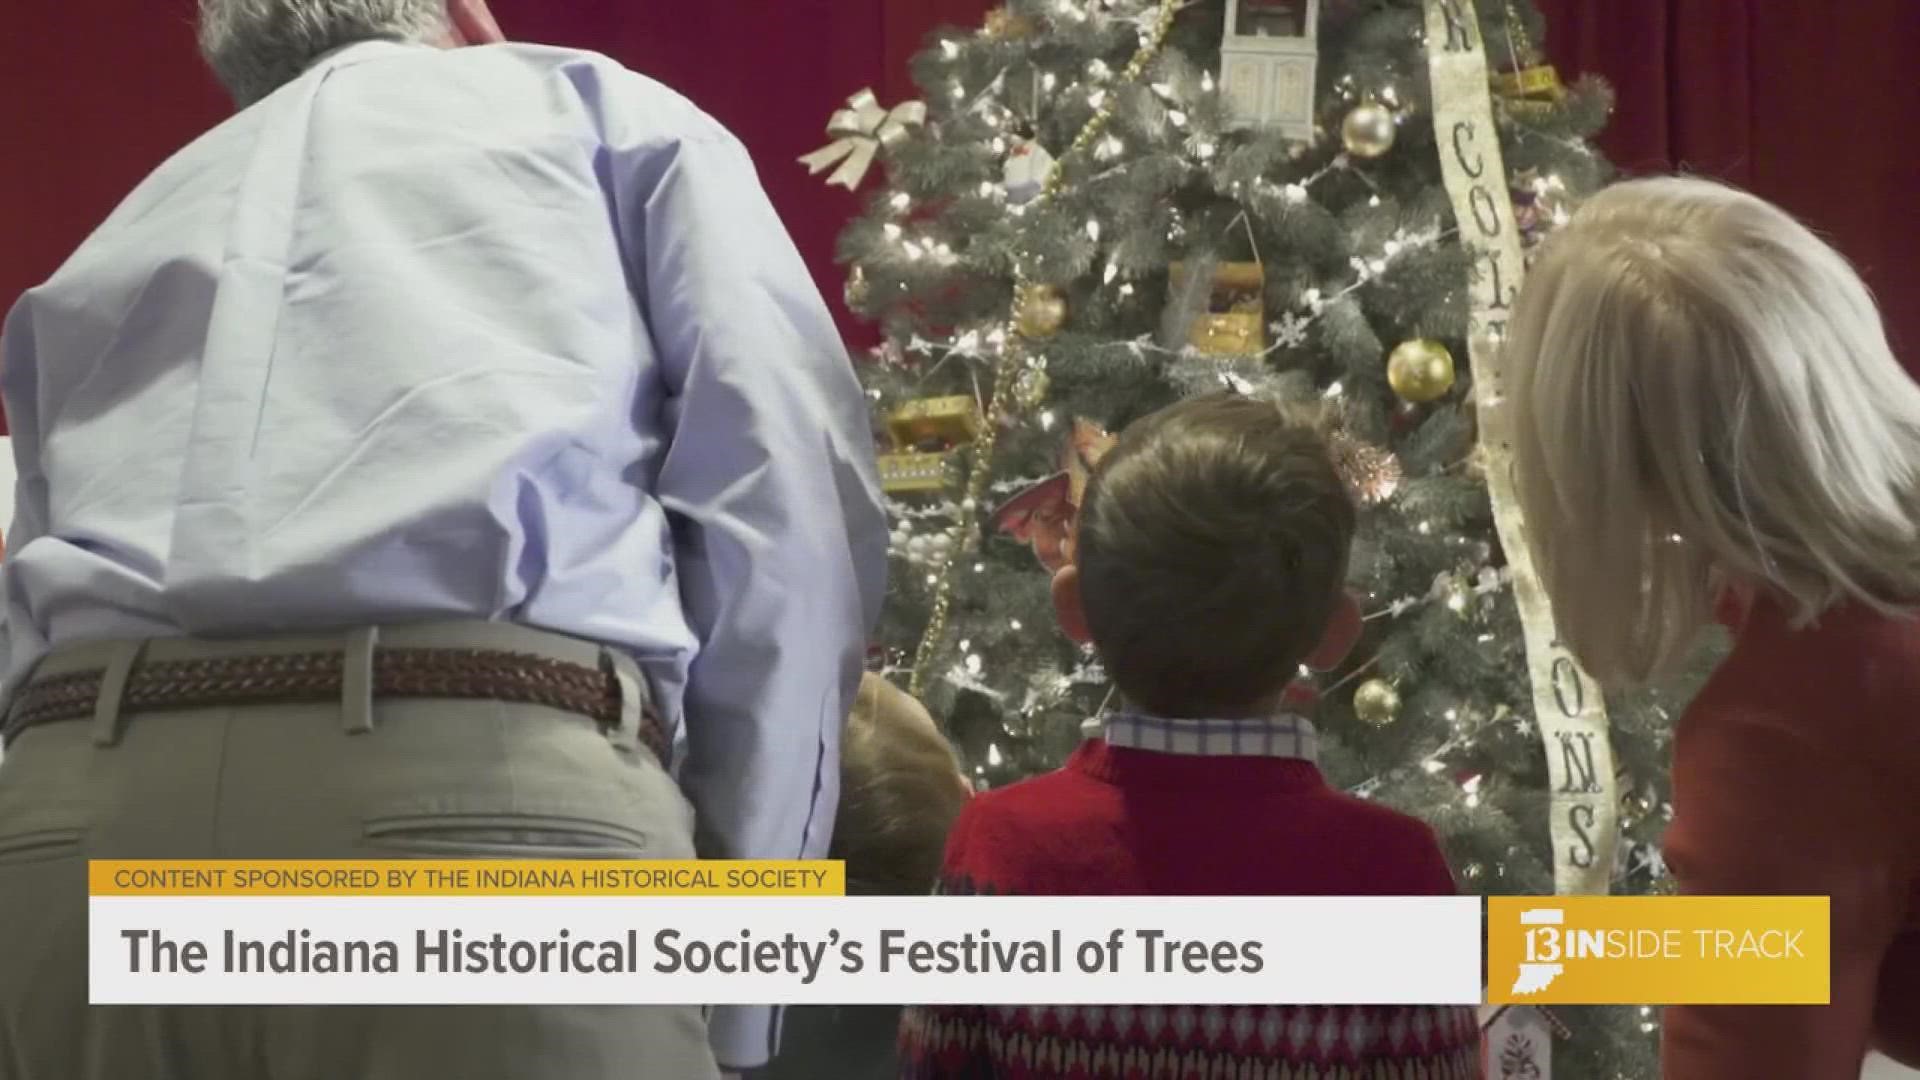 Join in the holiday festivities at the Indiana Historical Society's Festival of Trees